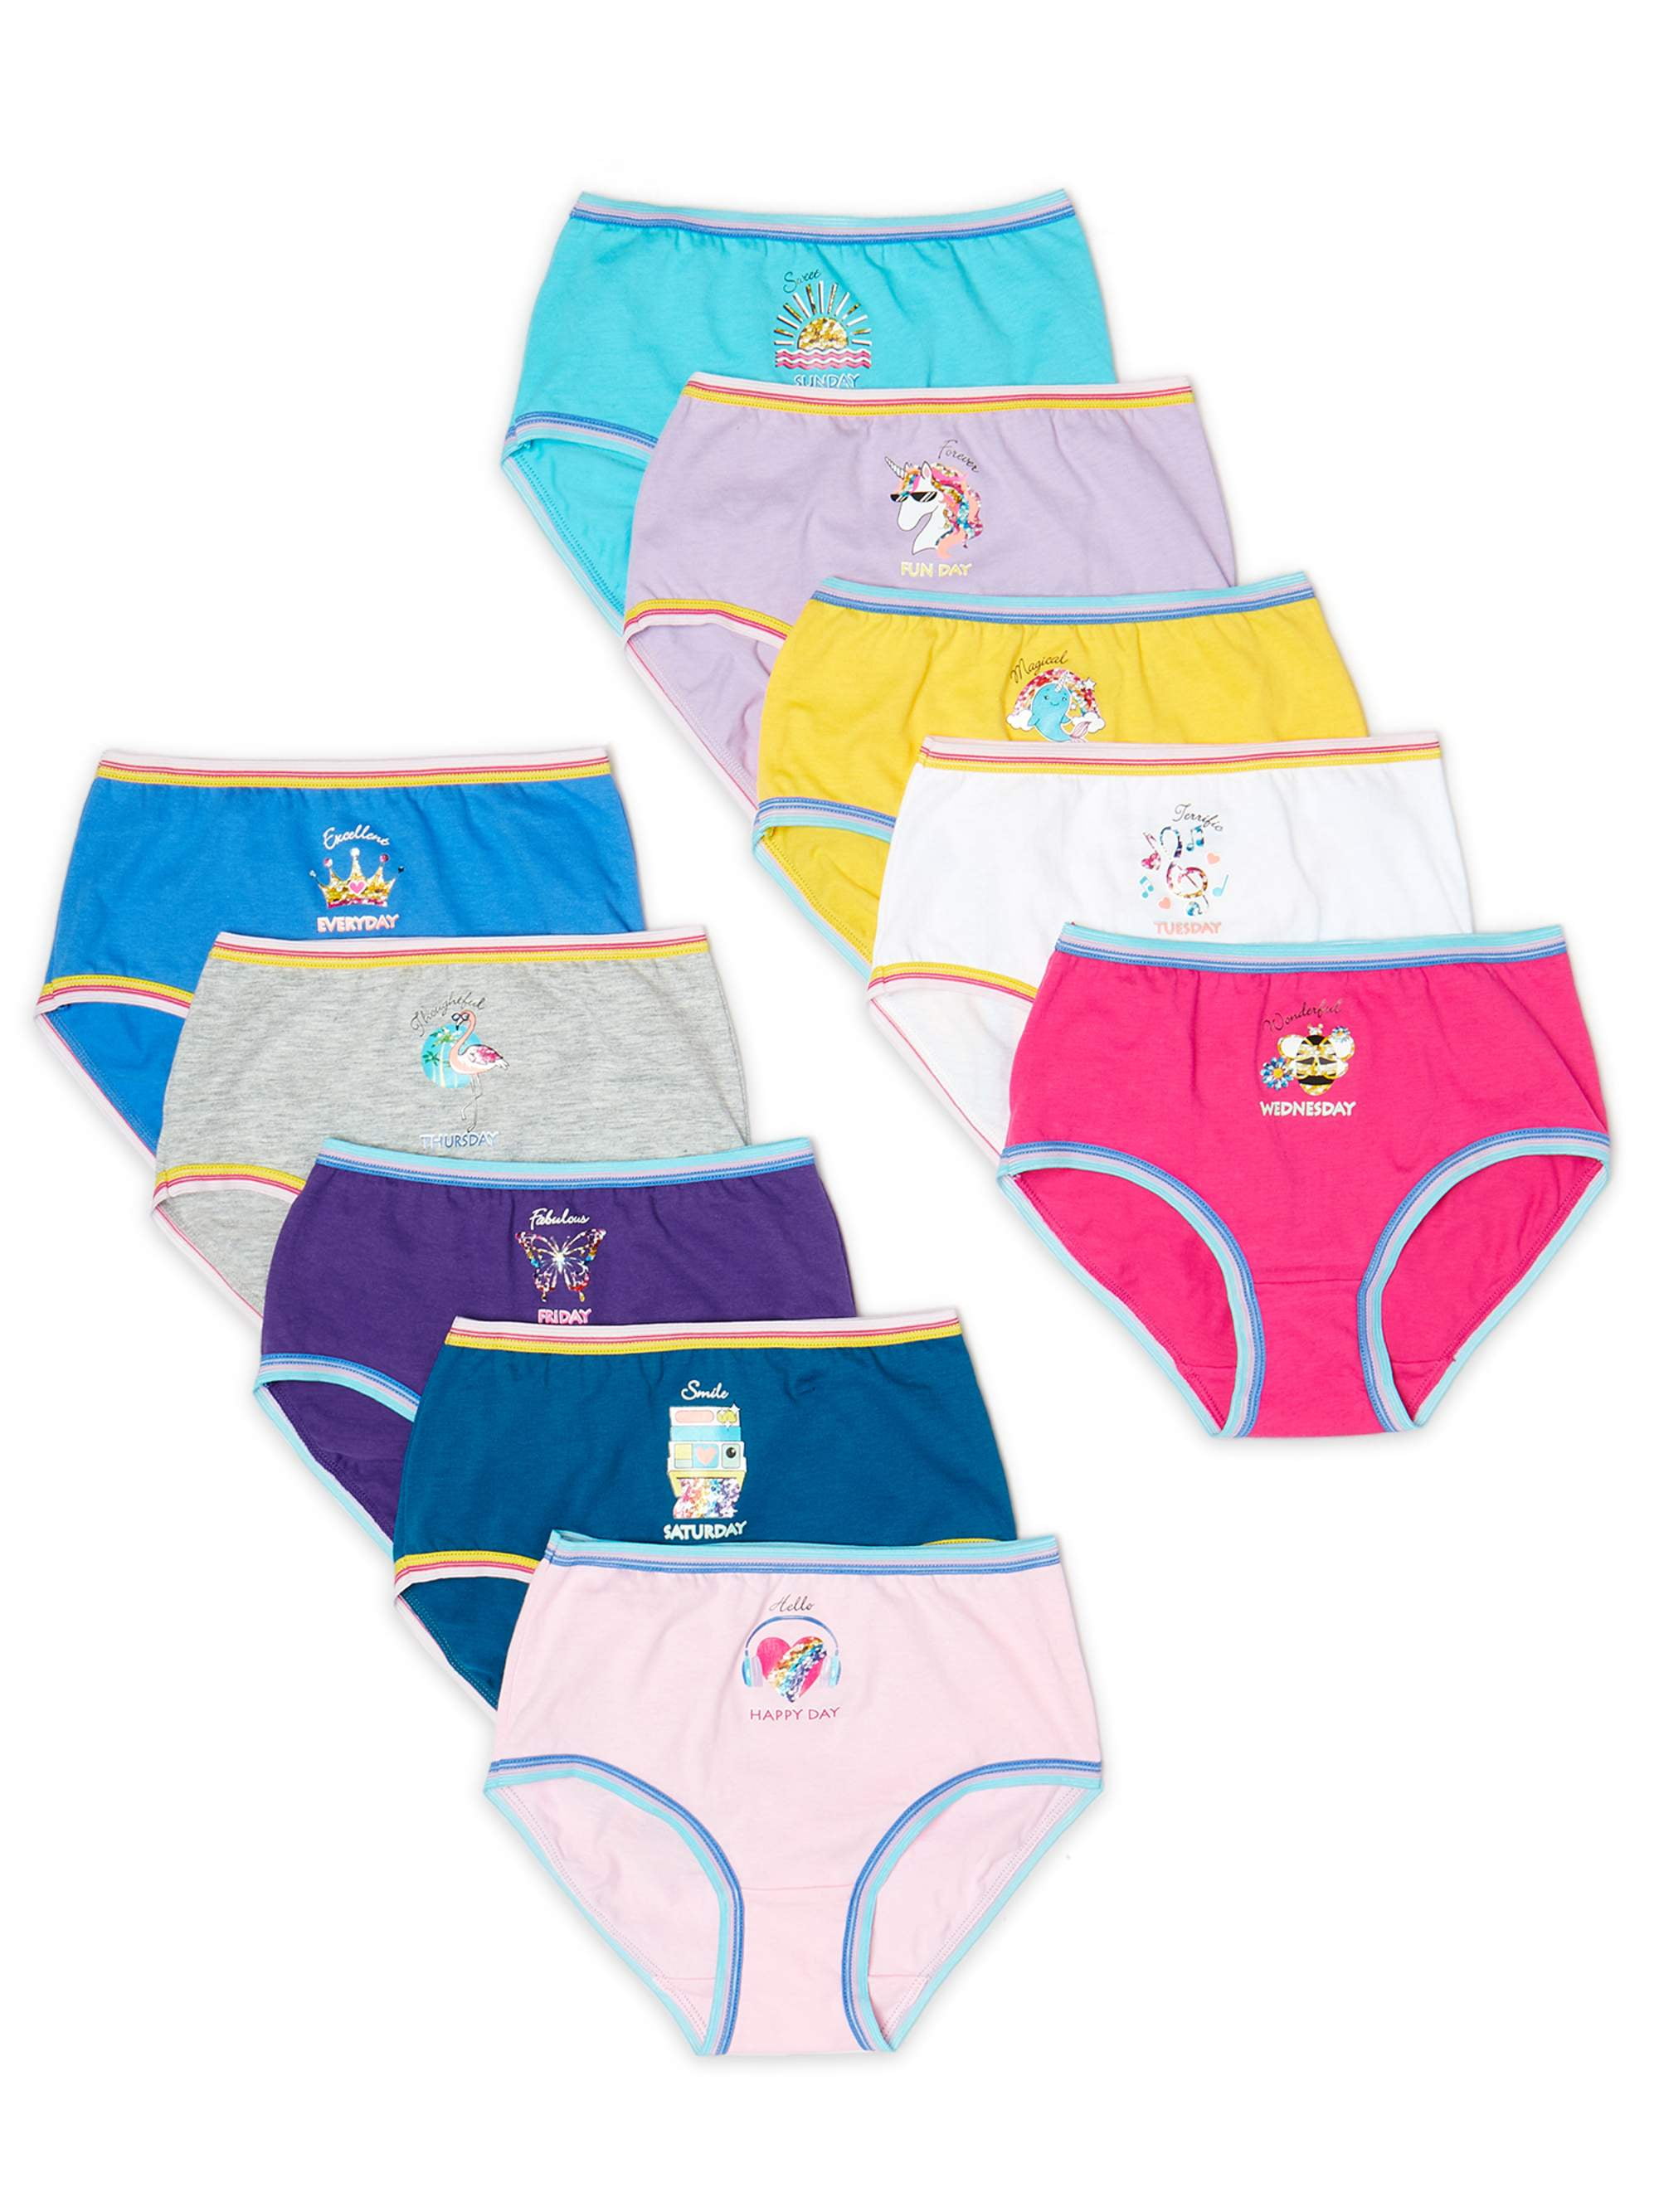 NEW TCP girls size 10-12 years Days of the Week Underwear - baby